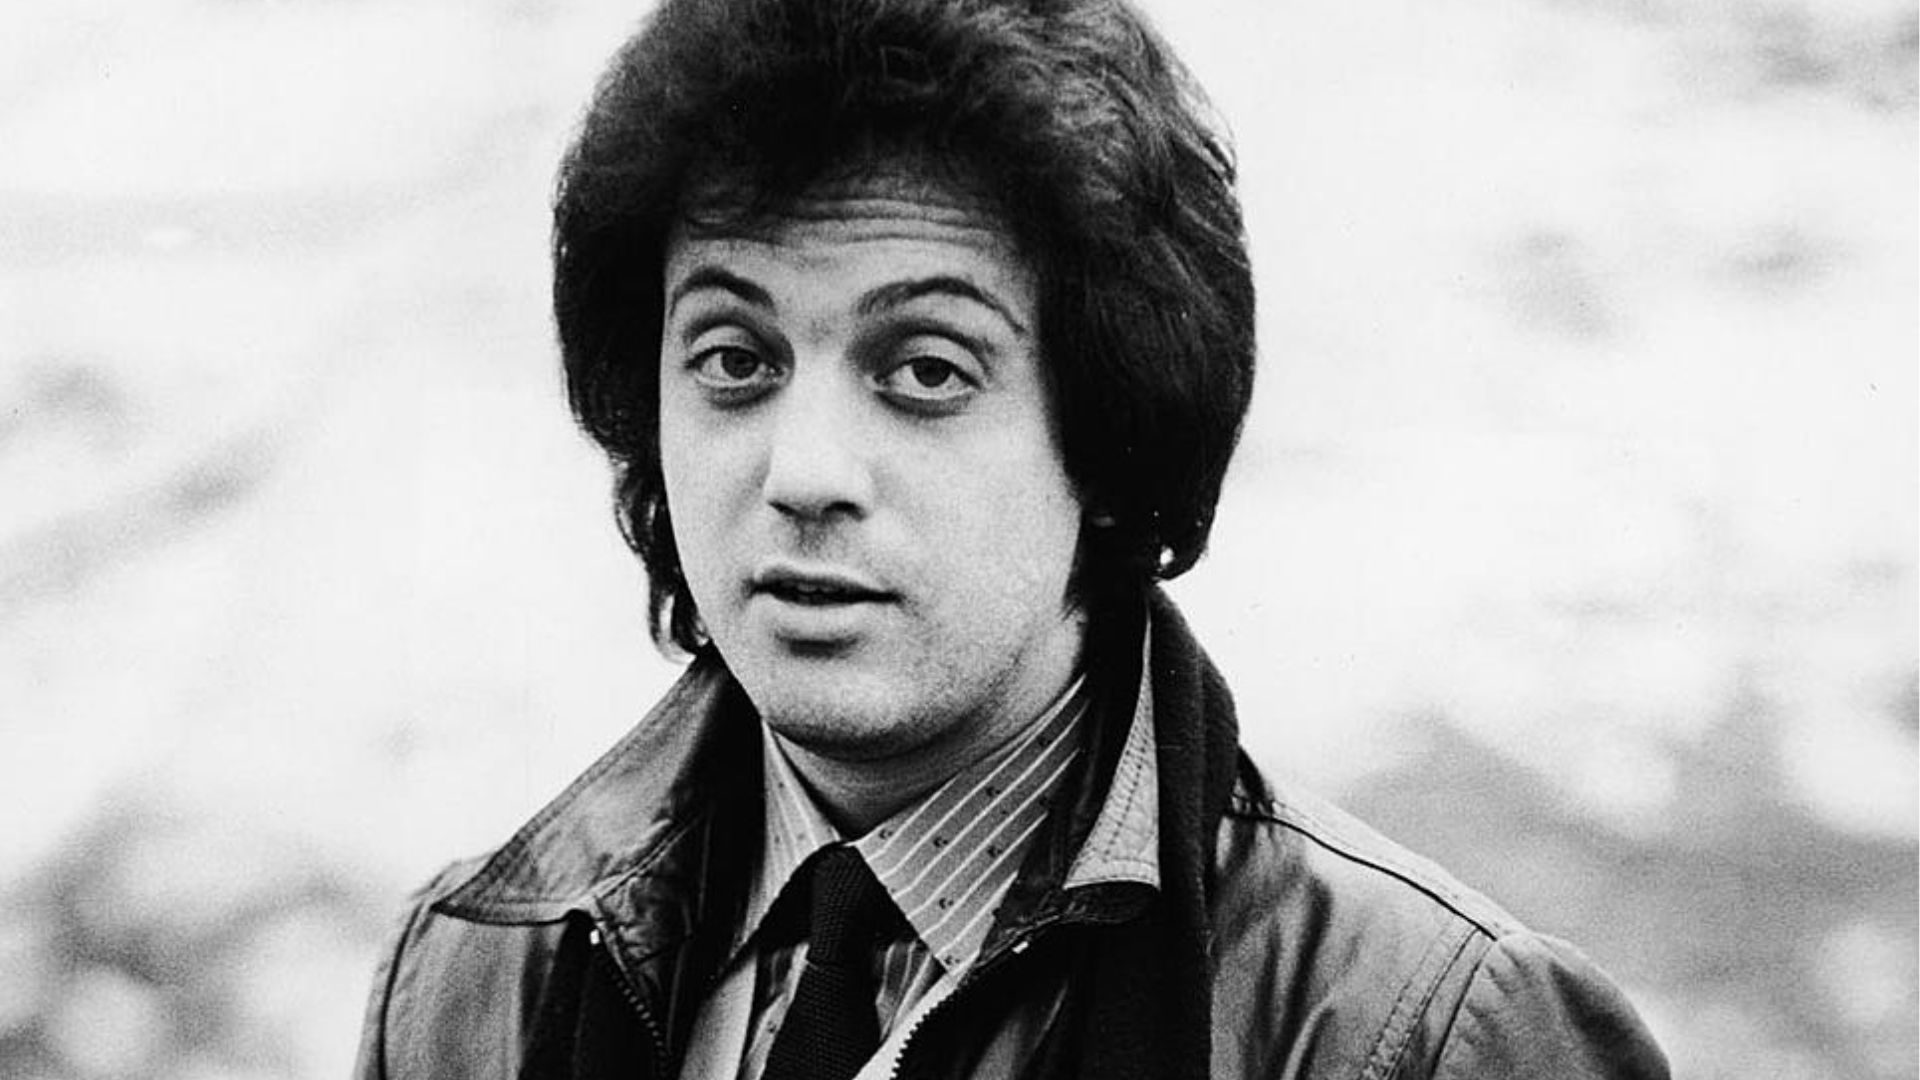 Billy Joel In Young Age